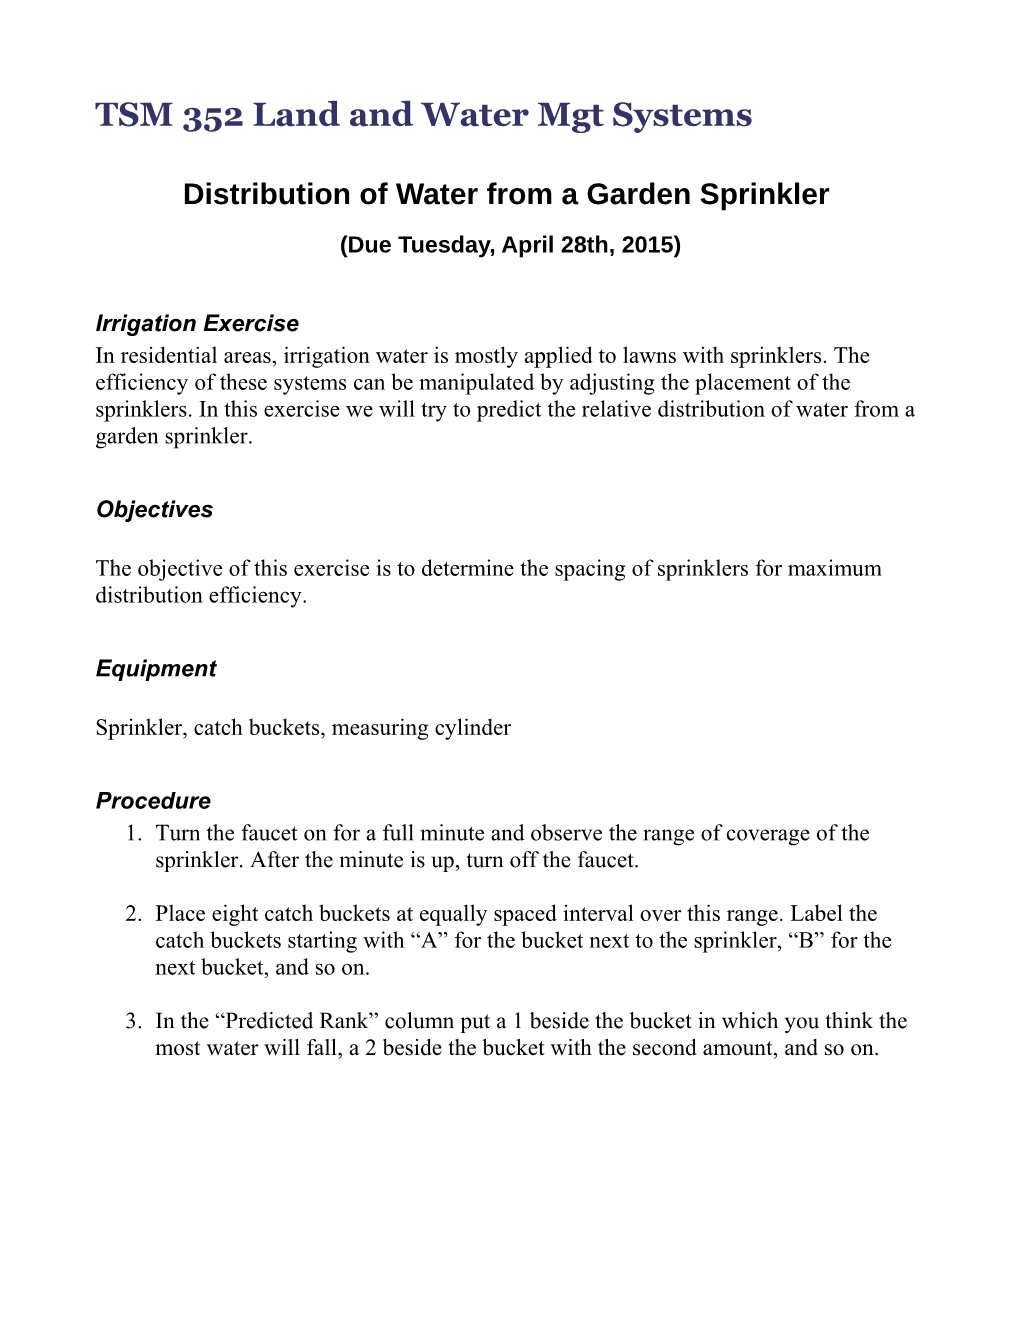 Evaluation of Irrigation Systems